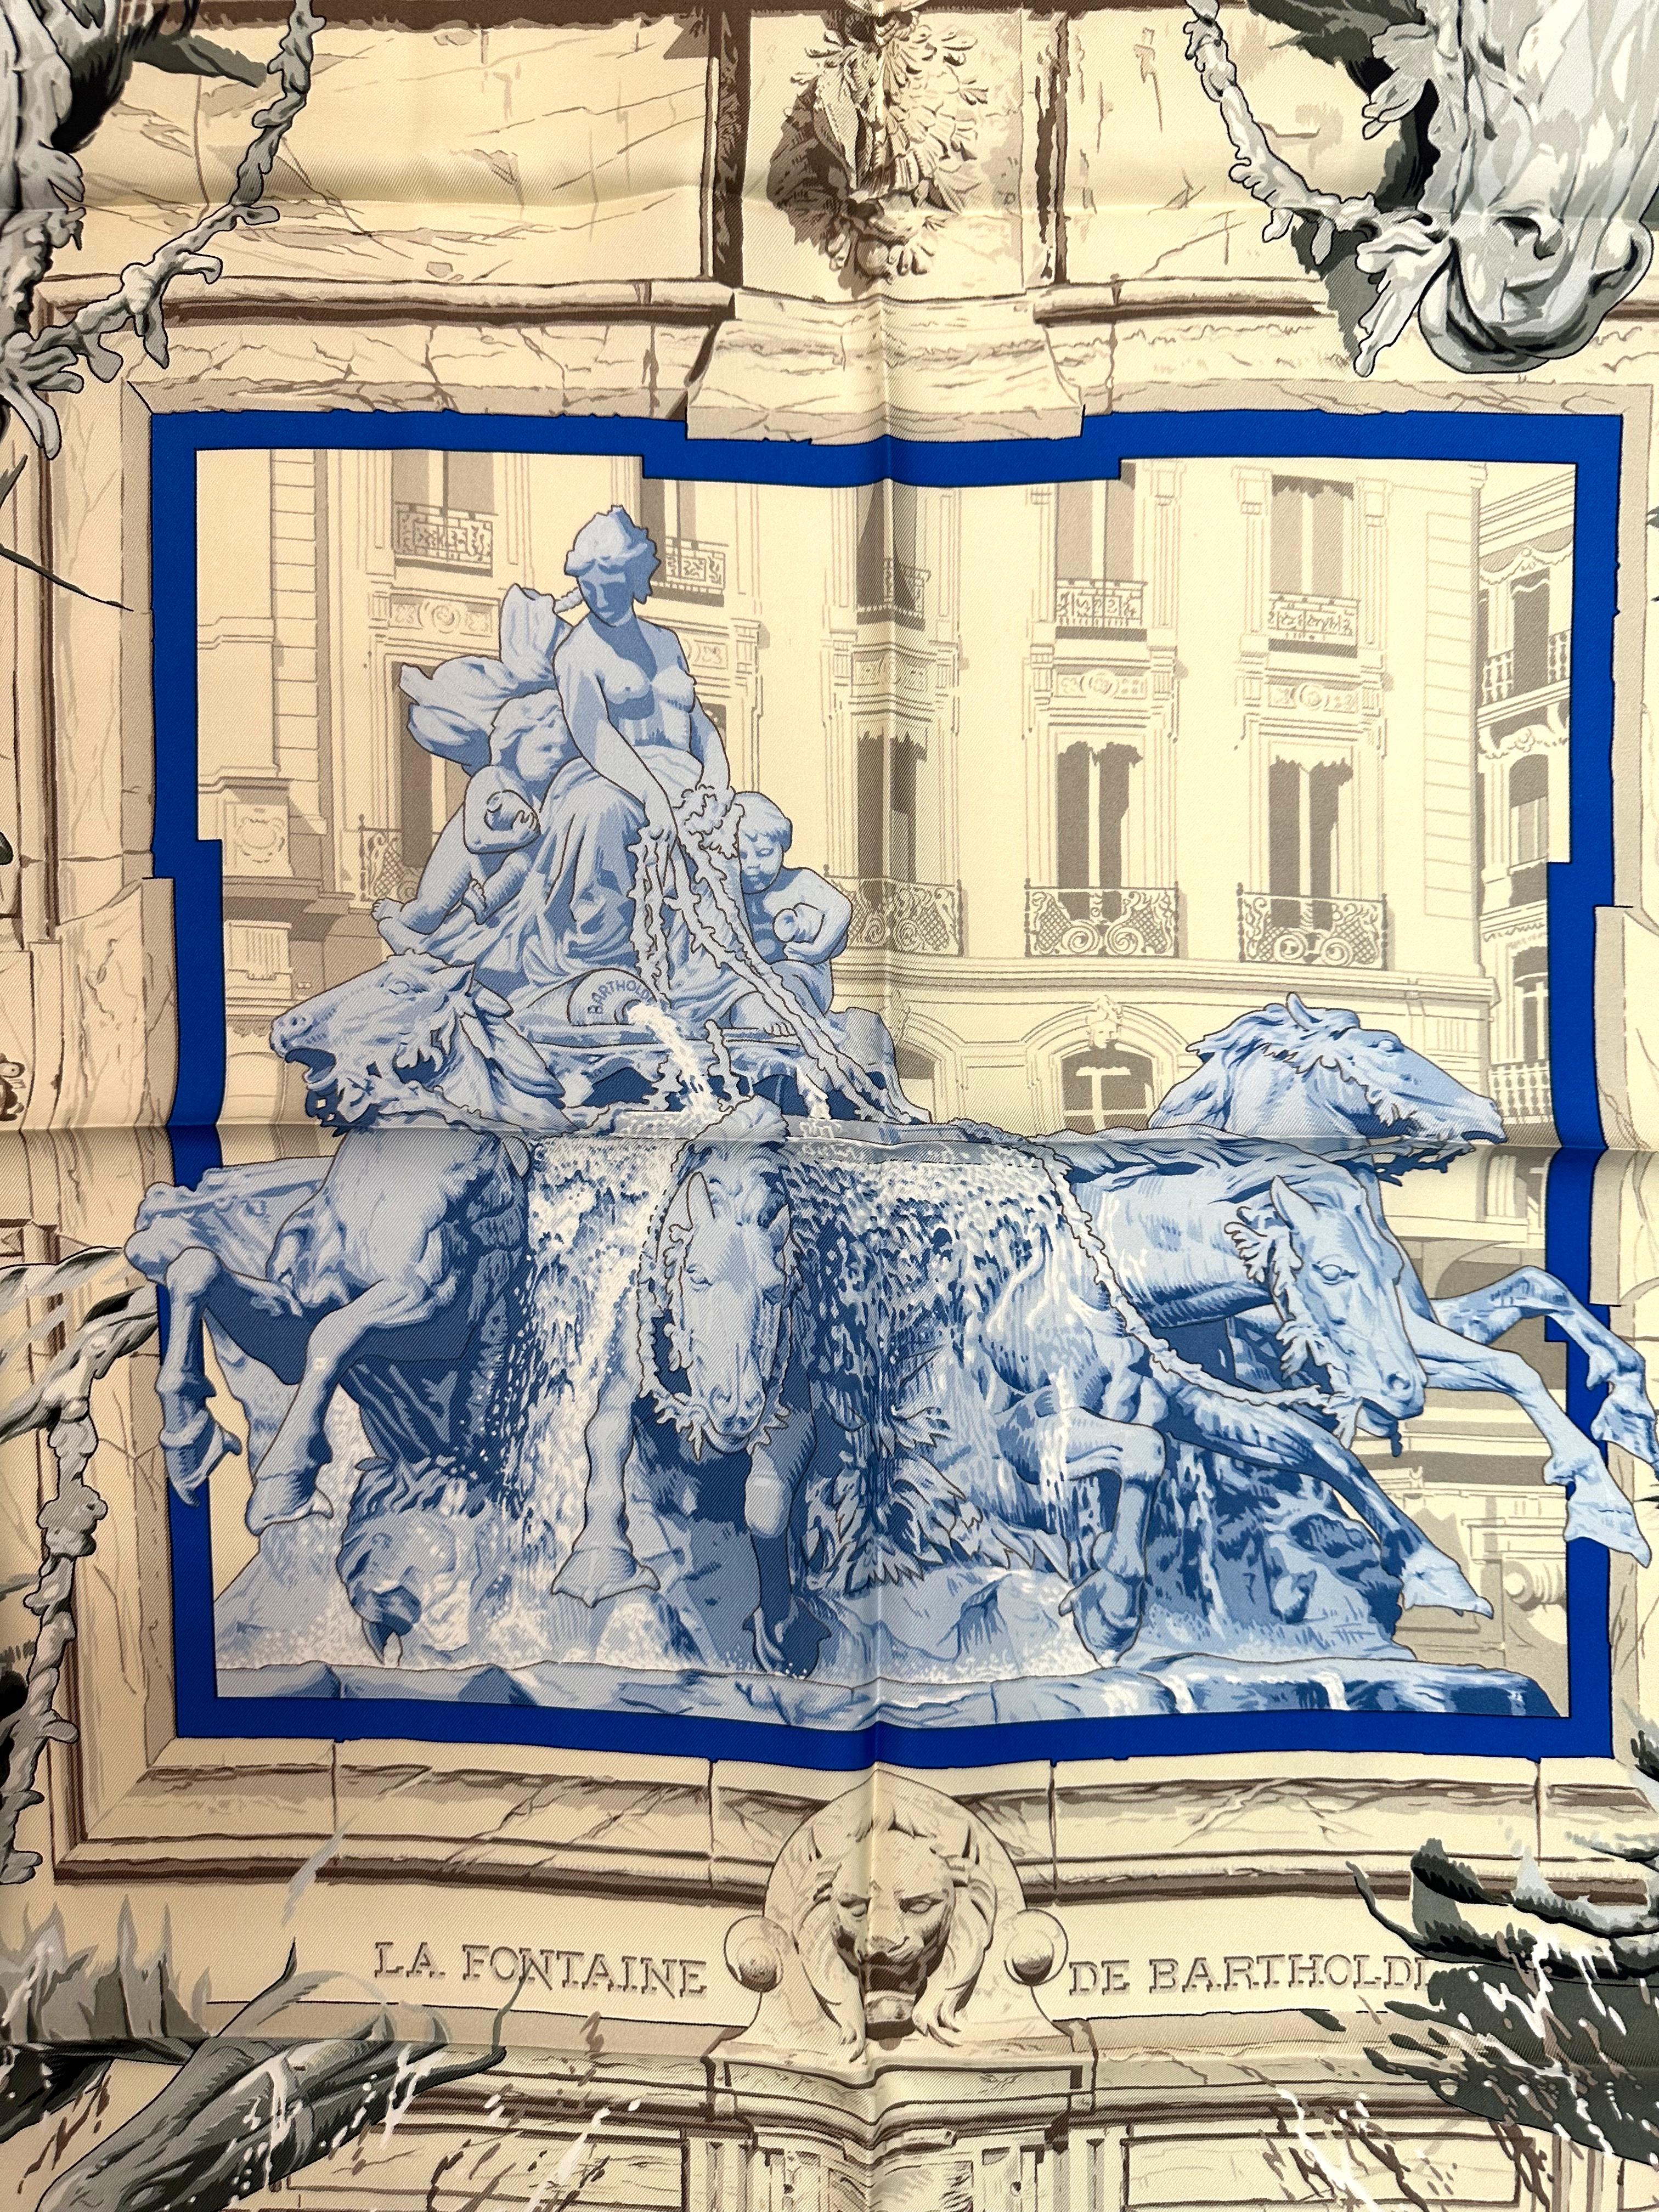 
Hermes Silk Scarf, La Fontaine De Bartholdi
designed by Vladimir Rybaltchenko, with box and ribbon. 35 by 35 in.
Condition Report
Good condition, almost new.